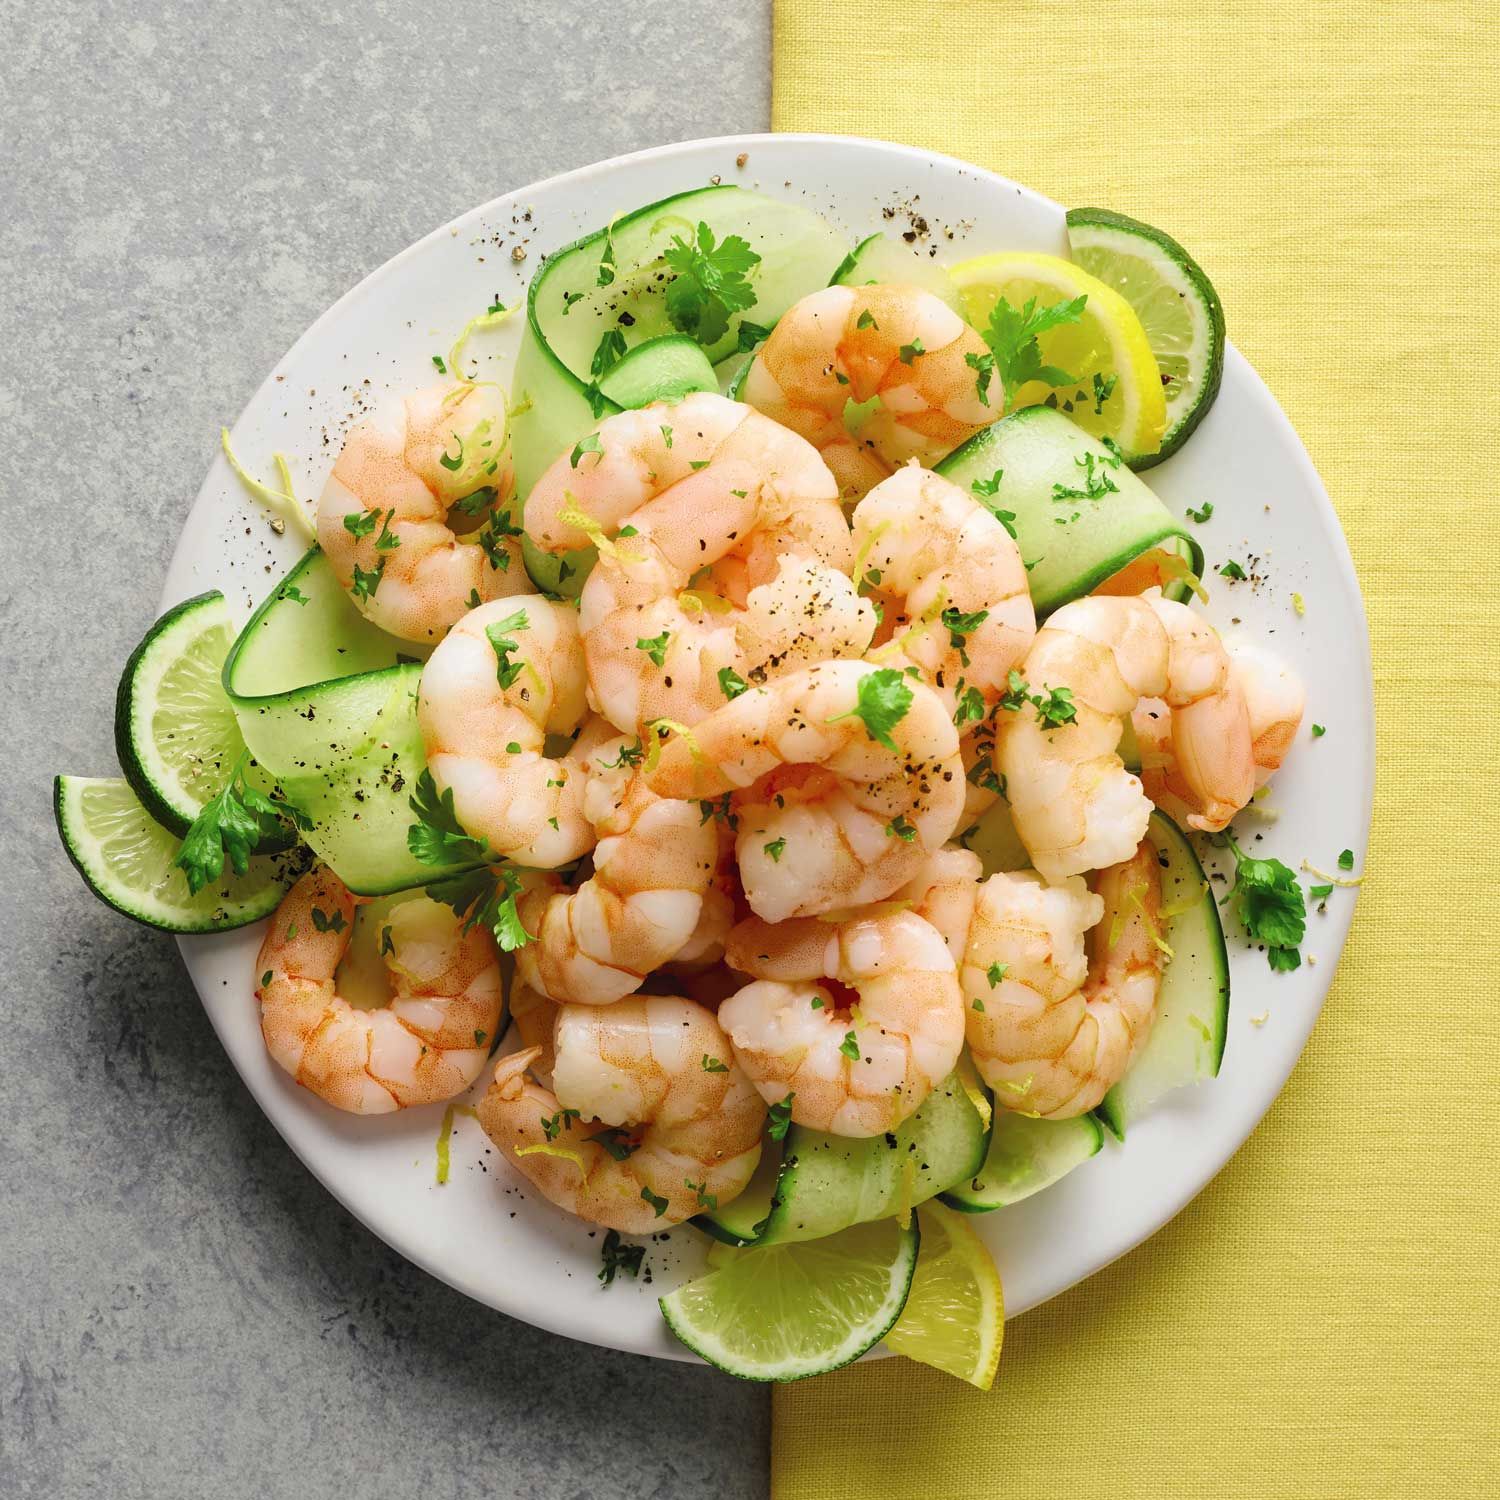 Specially Selected Cooked & Peeled Extra Large King Prawns 300g | ALDI